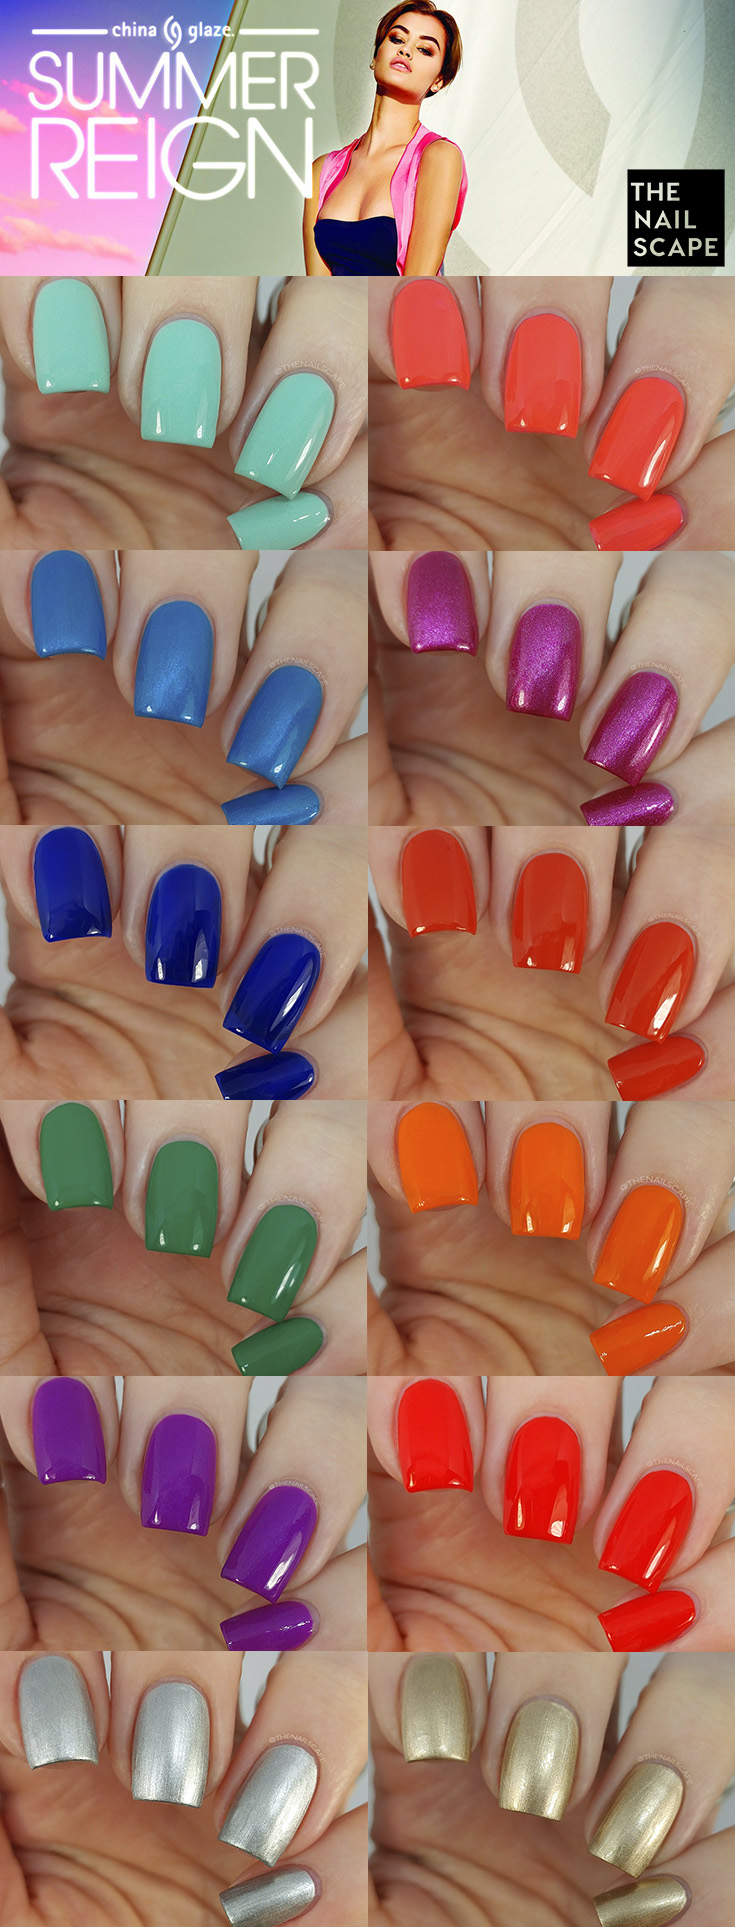 CHINA GLAZE SUMMER REIGN SWATCHES on The Nailscape